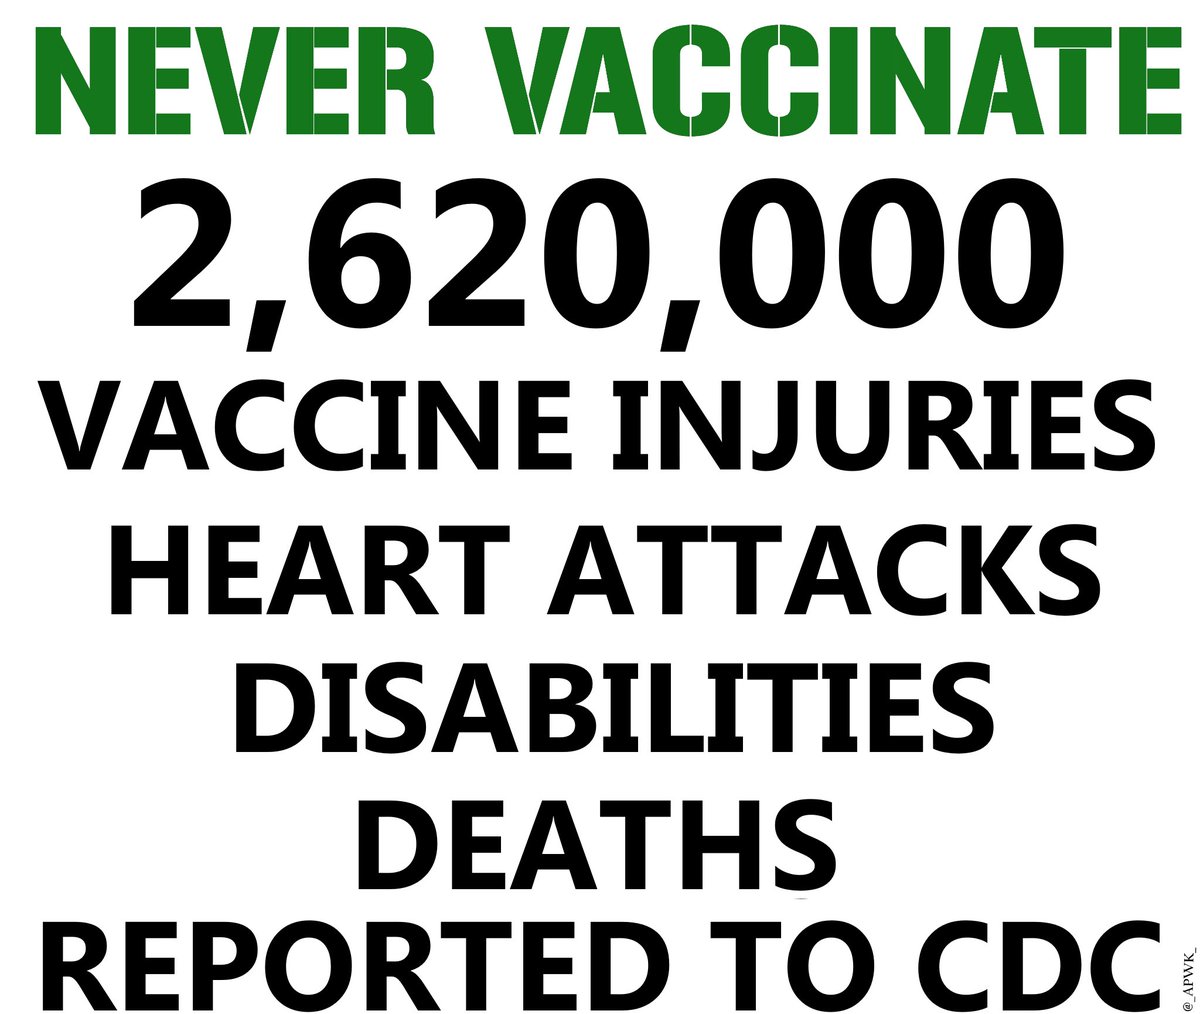 Number one reason I will never vaccinate myself or my children: there are no “viruses.”

Number two reason to